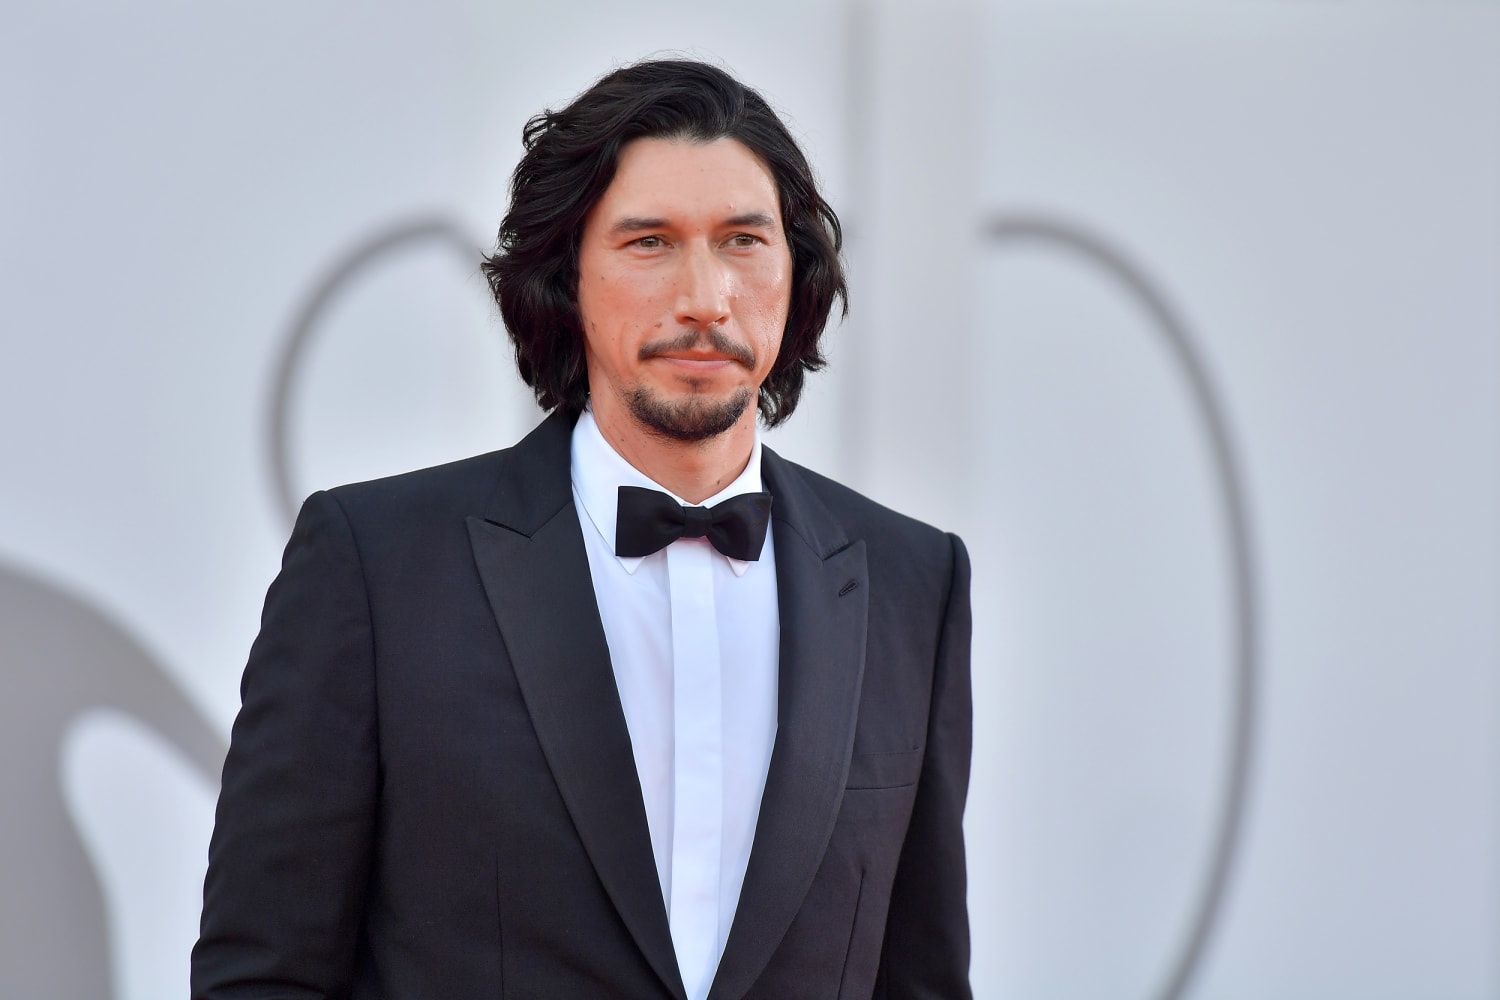 Adam Driver is cursed after a ‘Ferrari’ audience member asked about the ‘cheesy’ crash scenes.